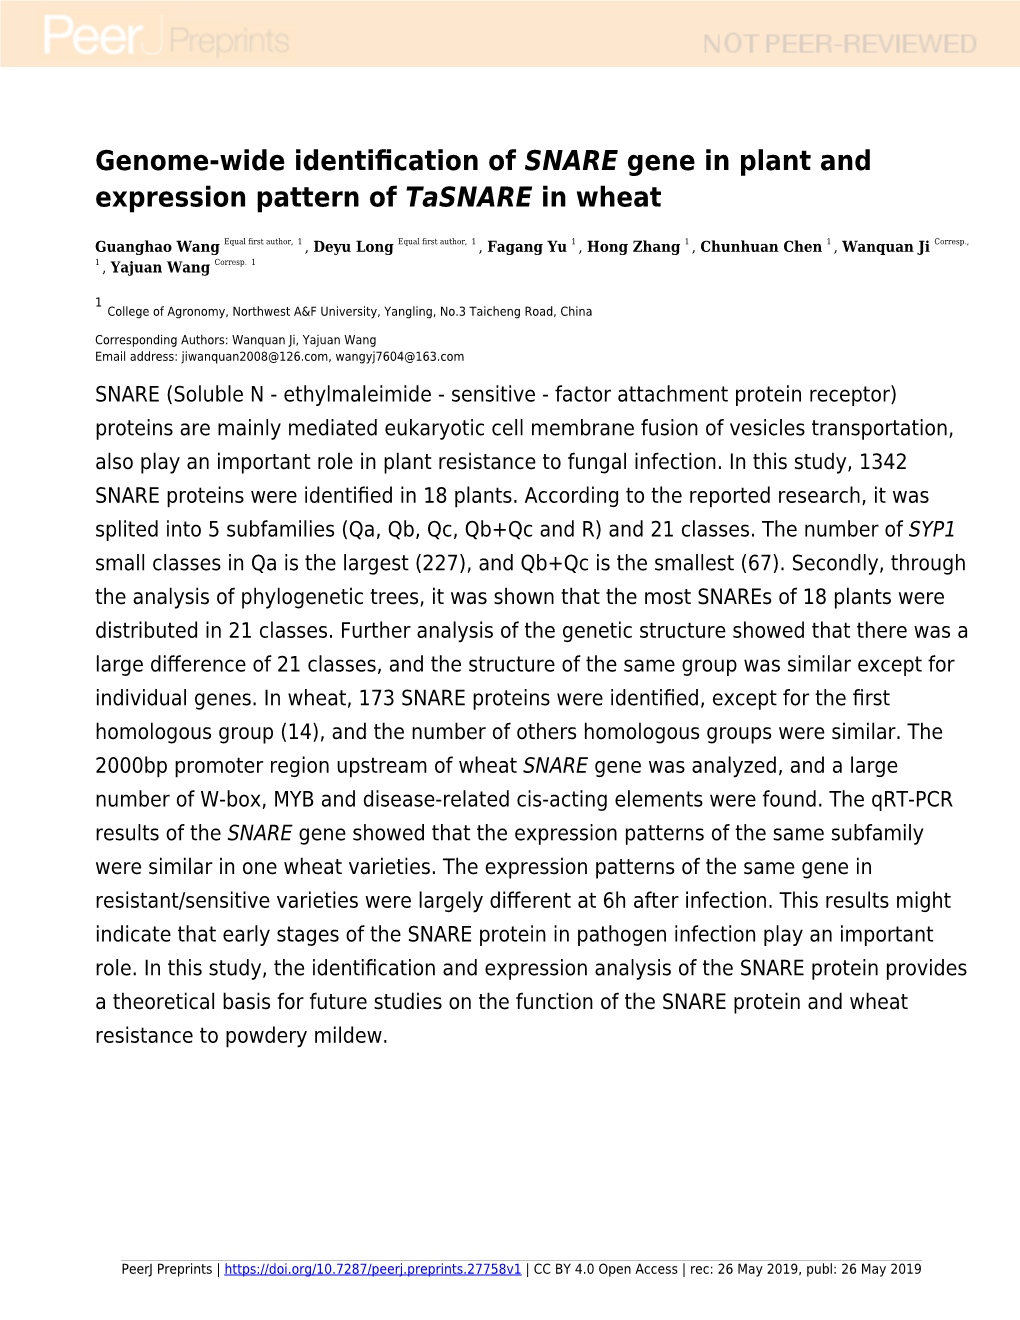 SNARE[I] Gene in Plant and Expression Pattern Of